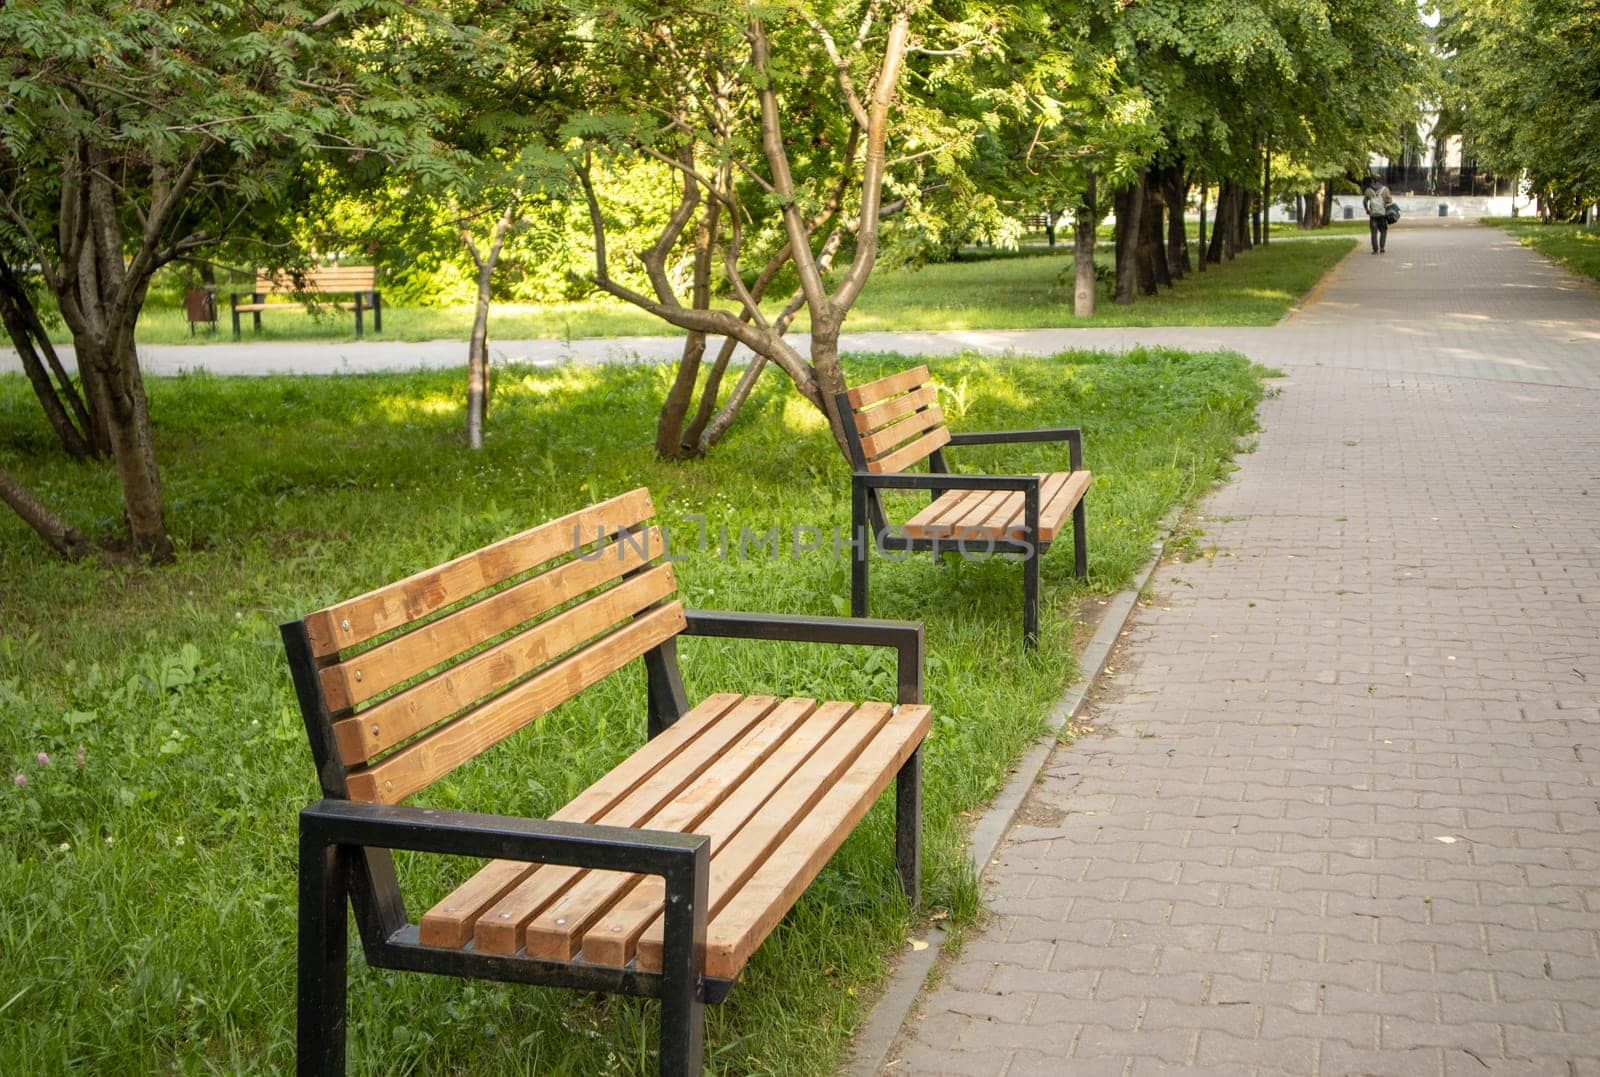 Two new wooden benches stand along the alley in the summer city park by claire_lucia